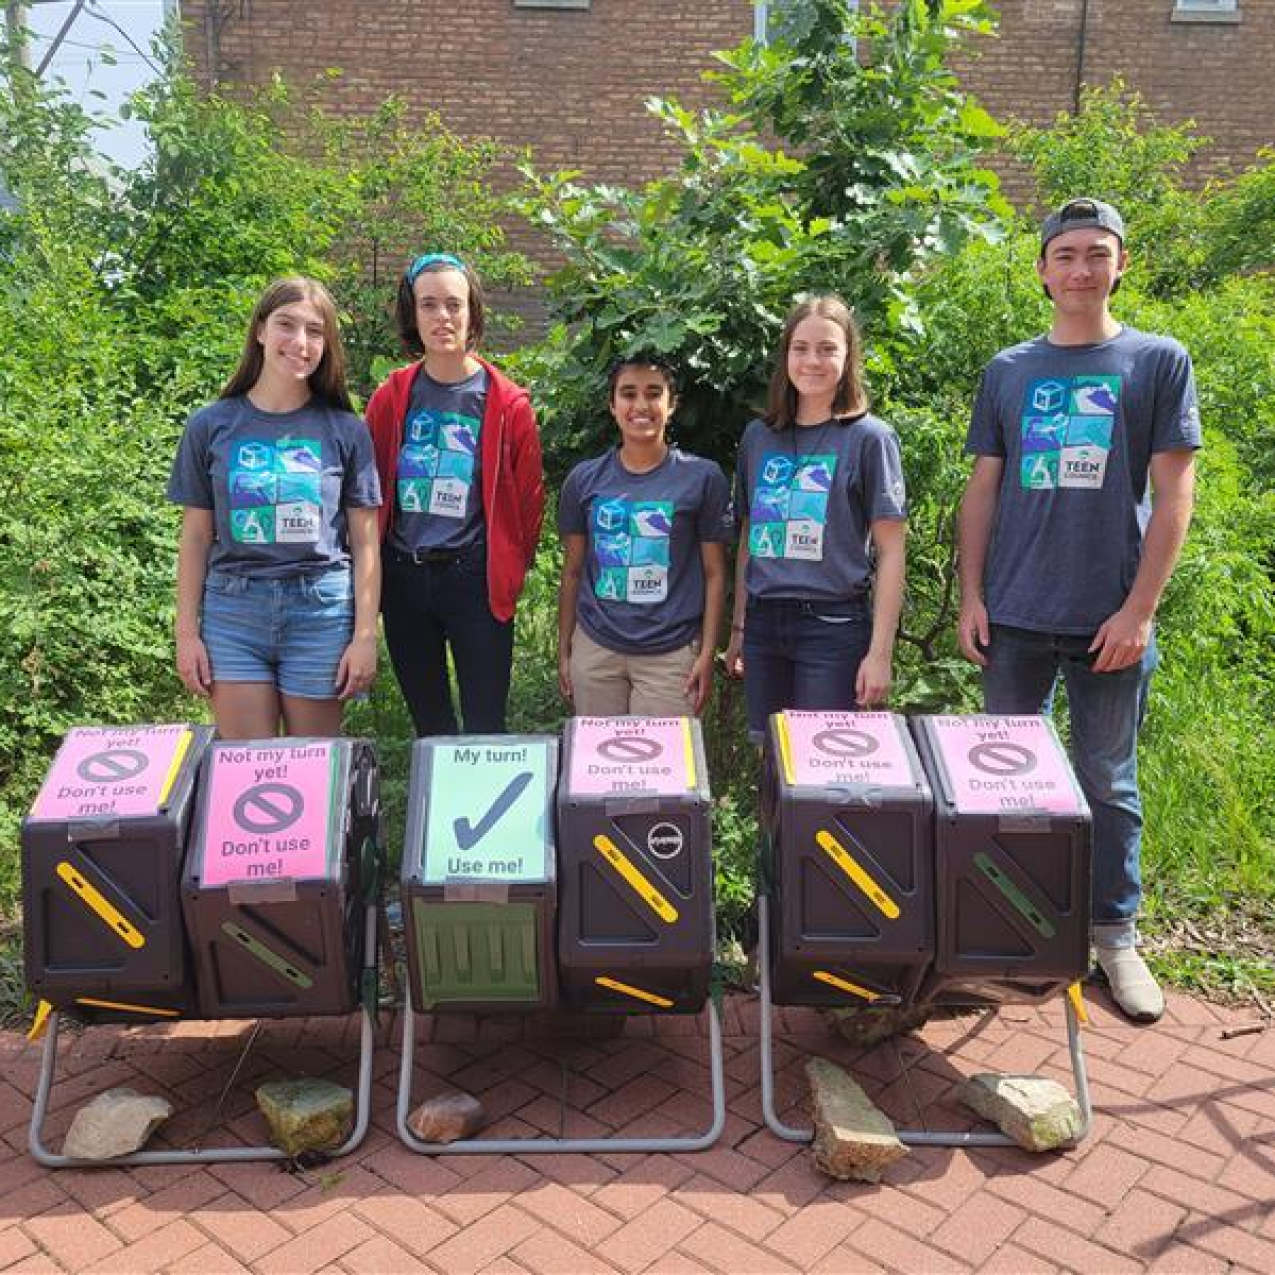 Five teens wearing matching aquarium t-shires stand behind a row of six plastic compost bins. Five of the bins have signs on top that say, "Not my turn yet! Don't use me!" while one says, "My turn! Use me!" They are outdoors, surrounded by lush greenery.